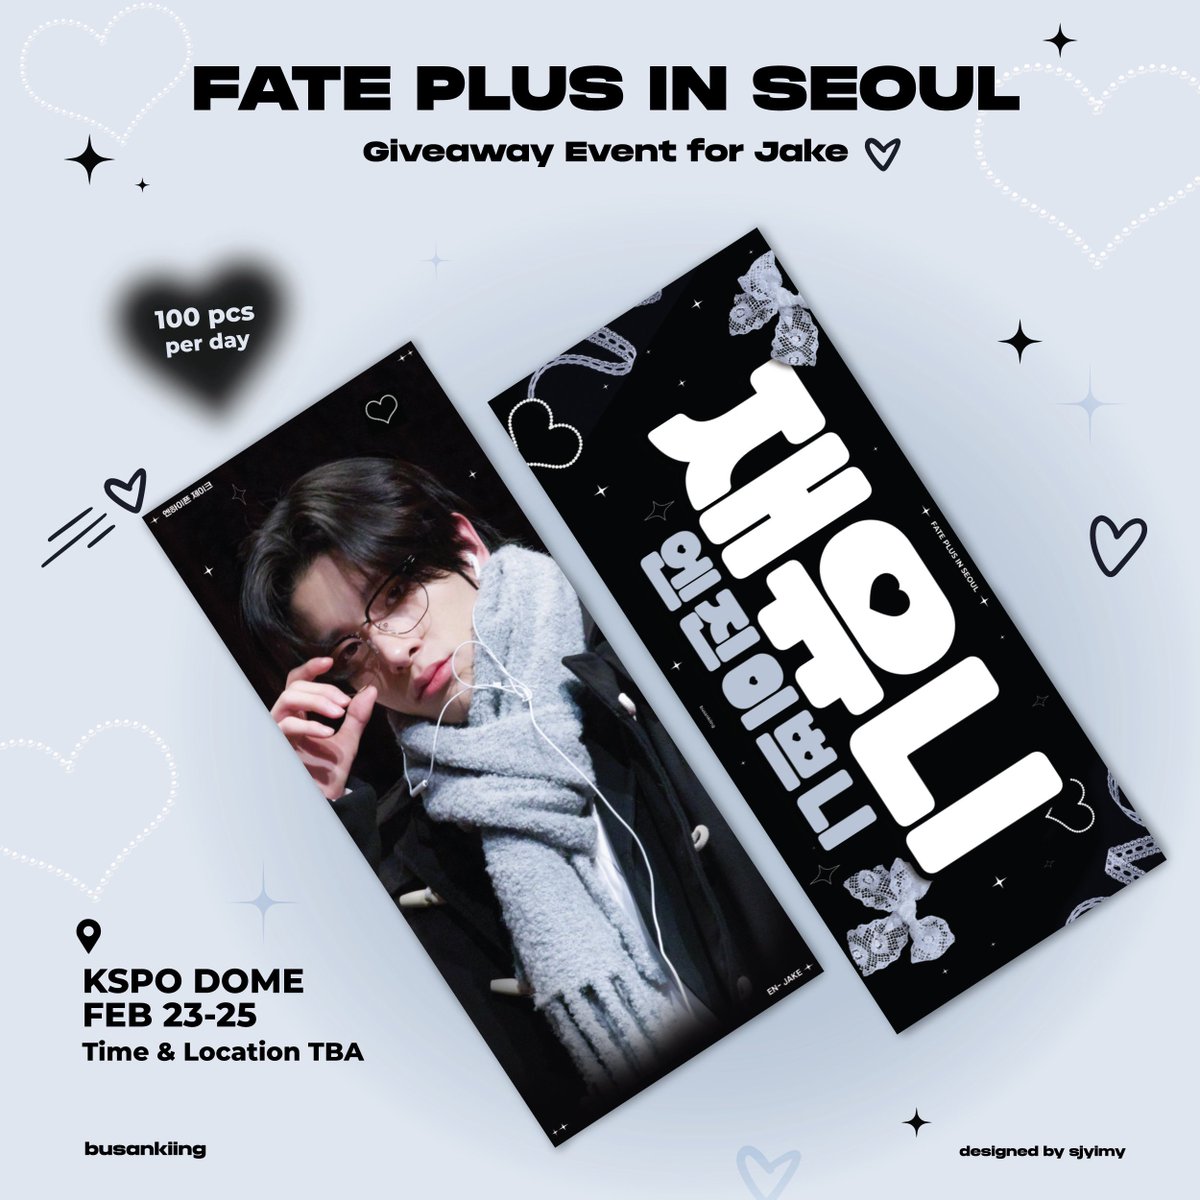 FATE + in SEOUL for JAKE 🤍 엔진이쁘니 ⋆˙⟡♡ ☆ 100 paper banners each day ☆ KSPO DOME ☆ exact time & location tba ☆ rt + only for ticket holders #JAKE #제이크 #엔하이픈 #엔하이픈_제이크